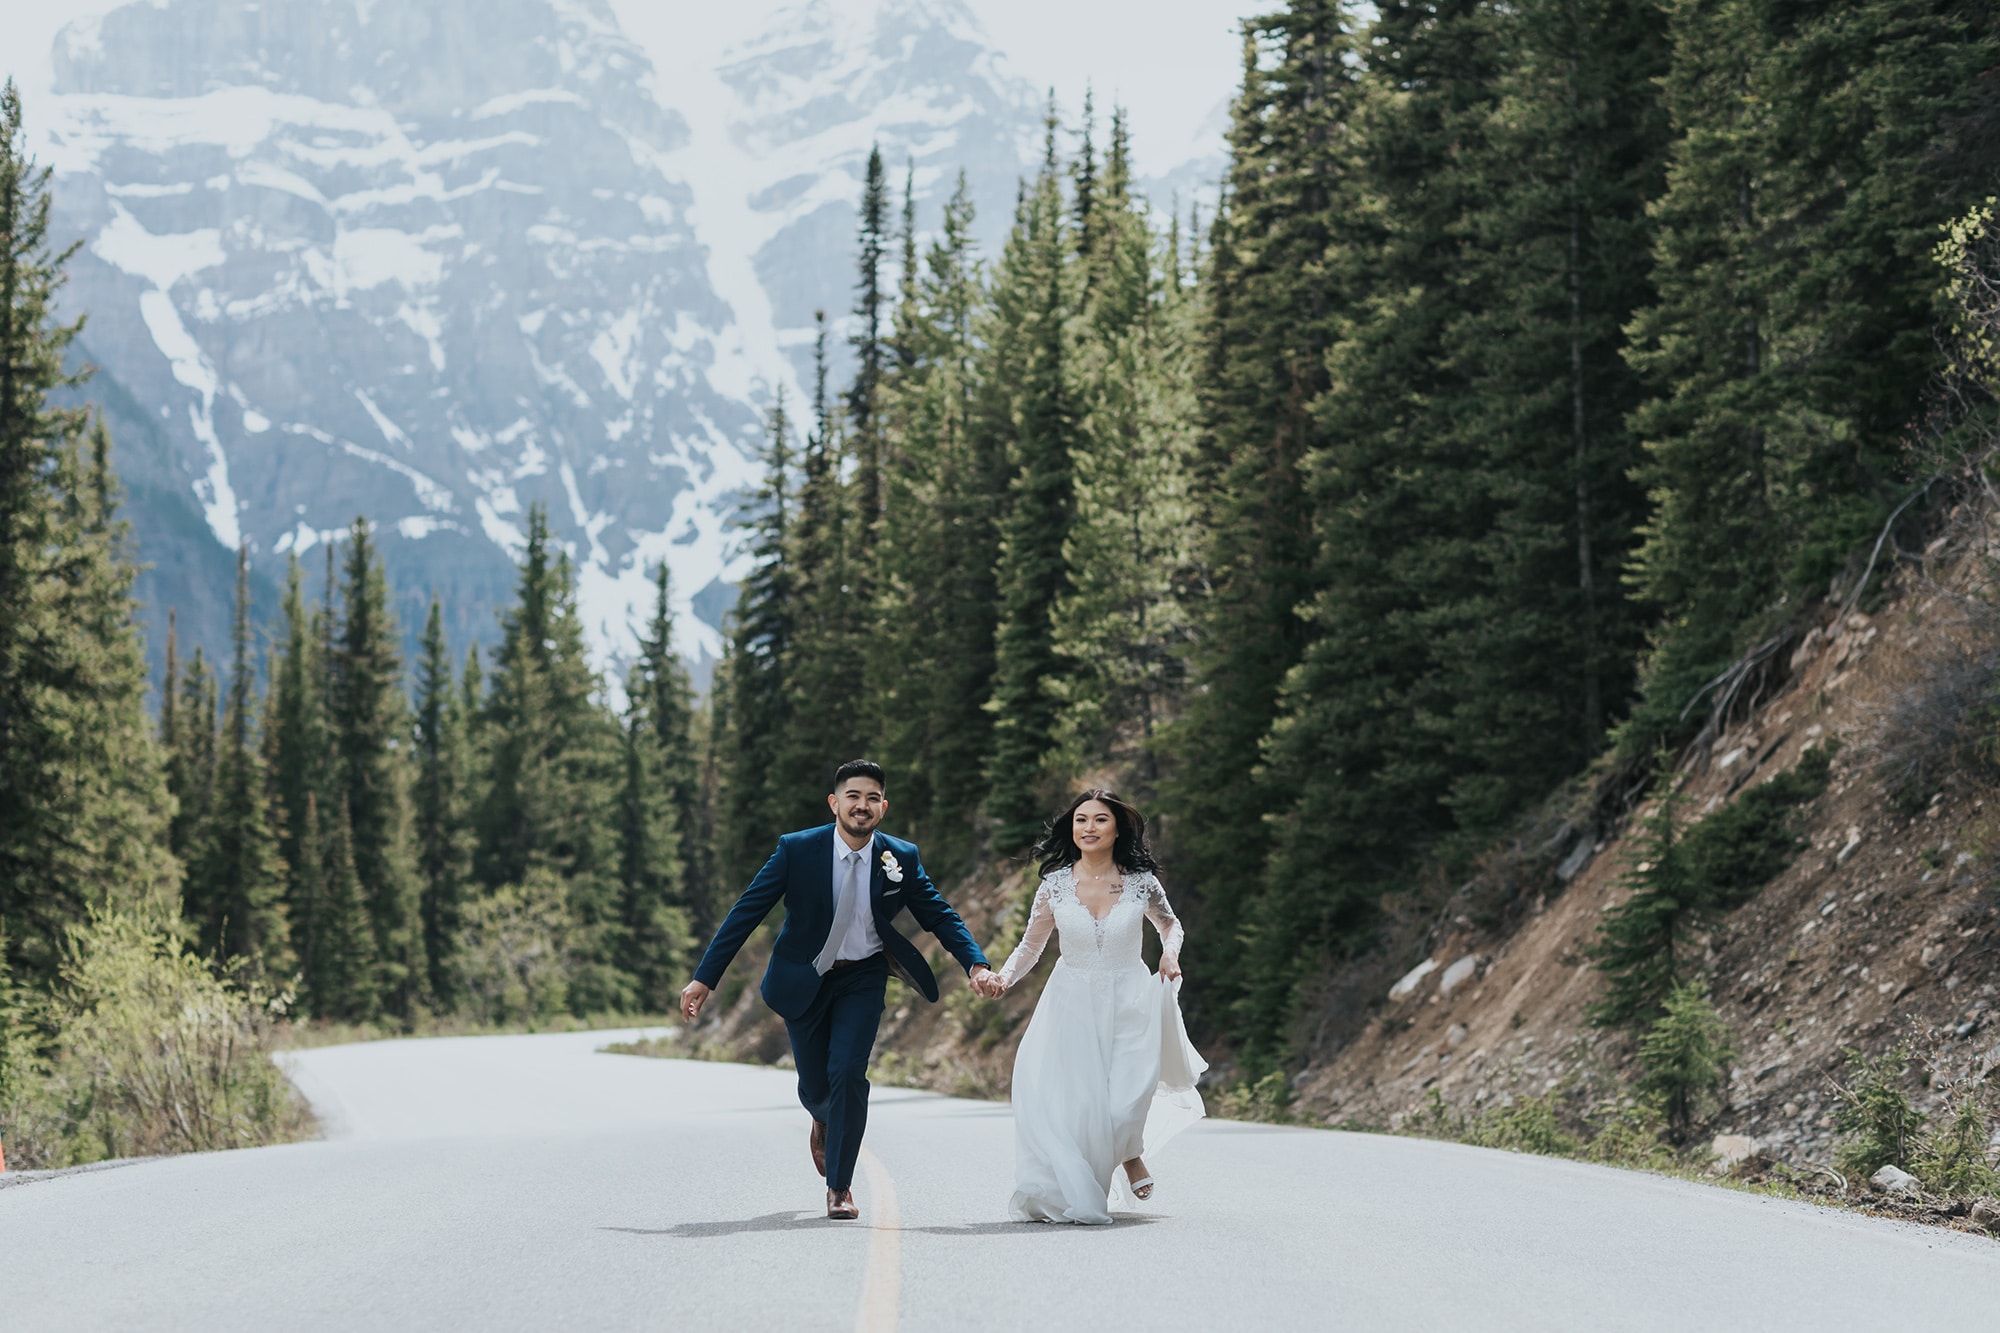 running to the mountains to get married!